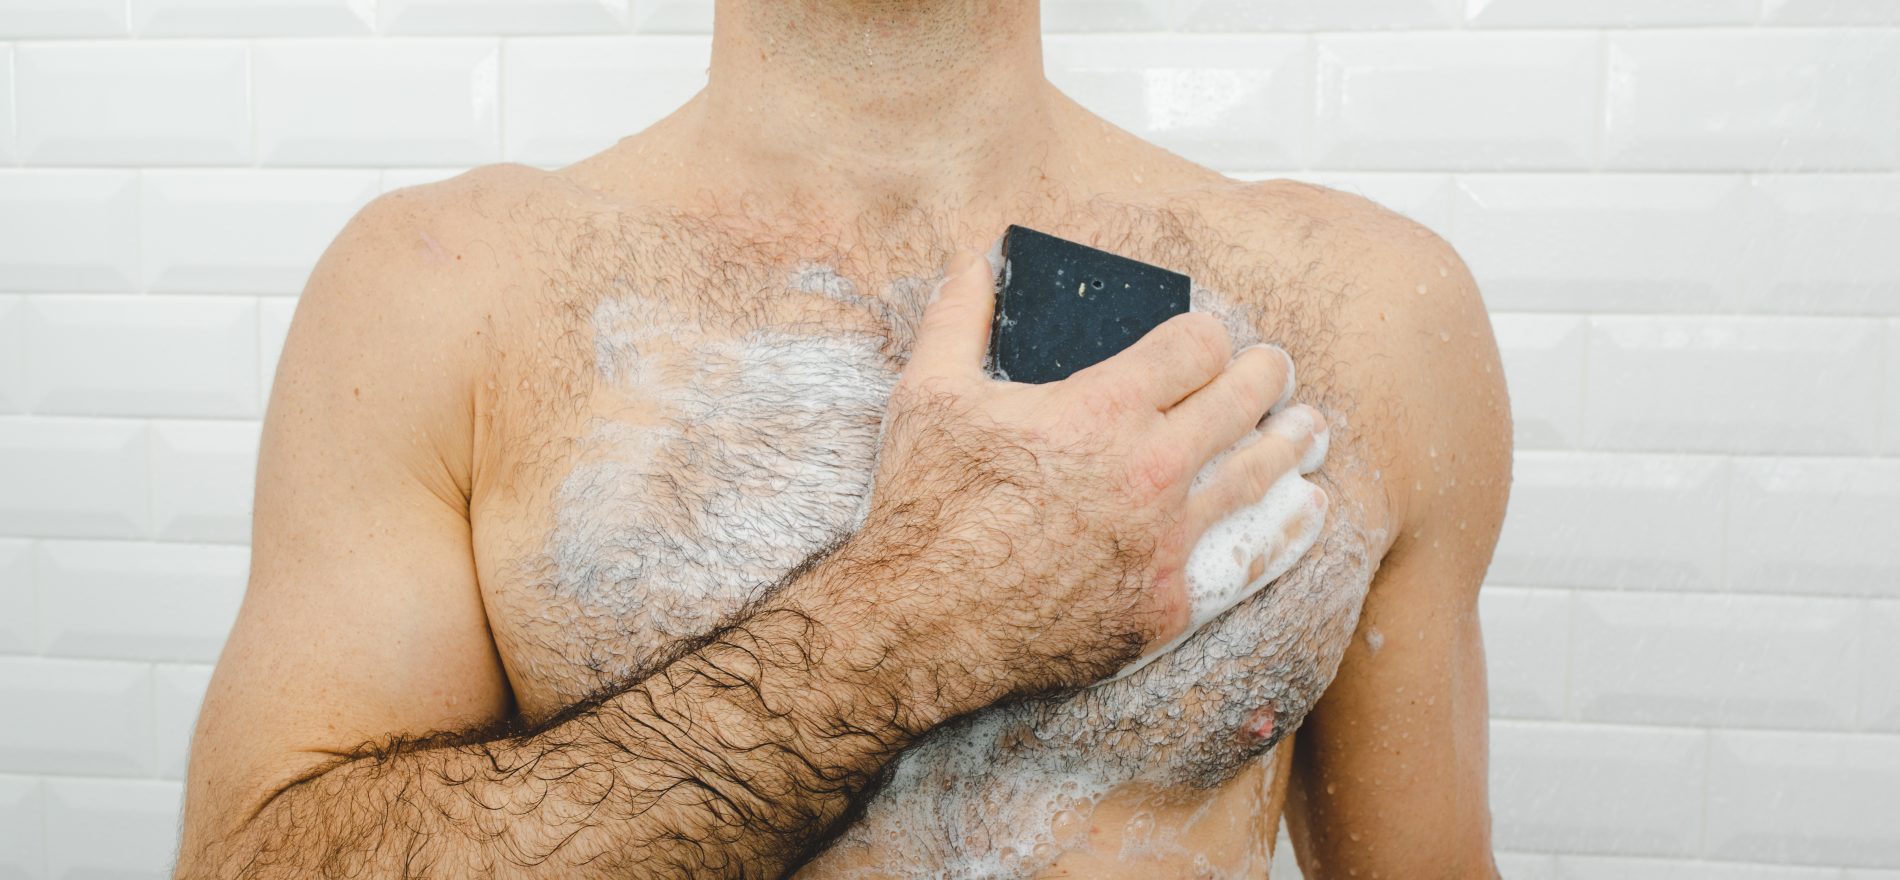 Bar Soap vs Body Wash: Which should you use? · Effortless Gent